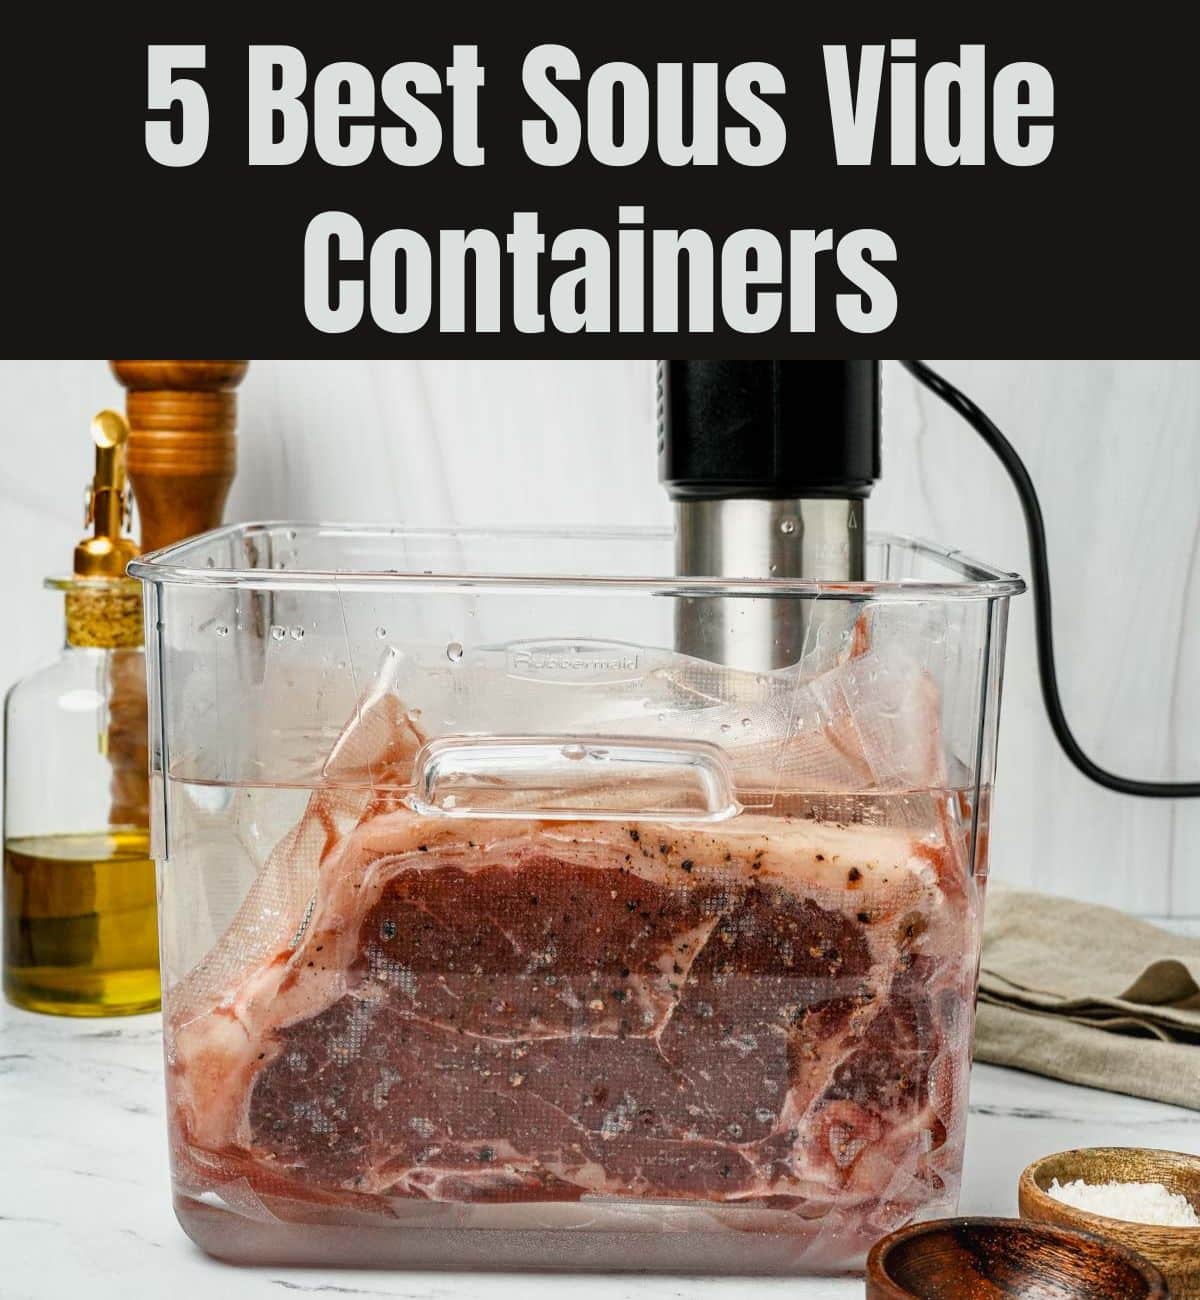 https://www.wenthere8this.com/wp-content/uploads/2023/07/5-Best-Sous-Vide-Containers.jpg